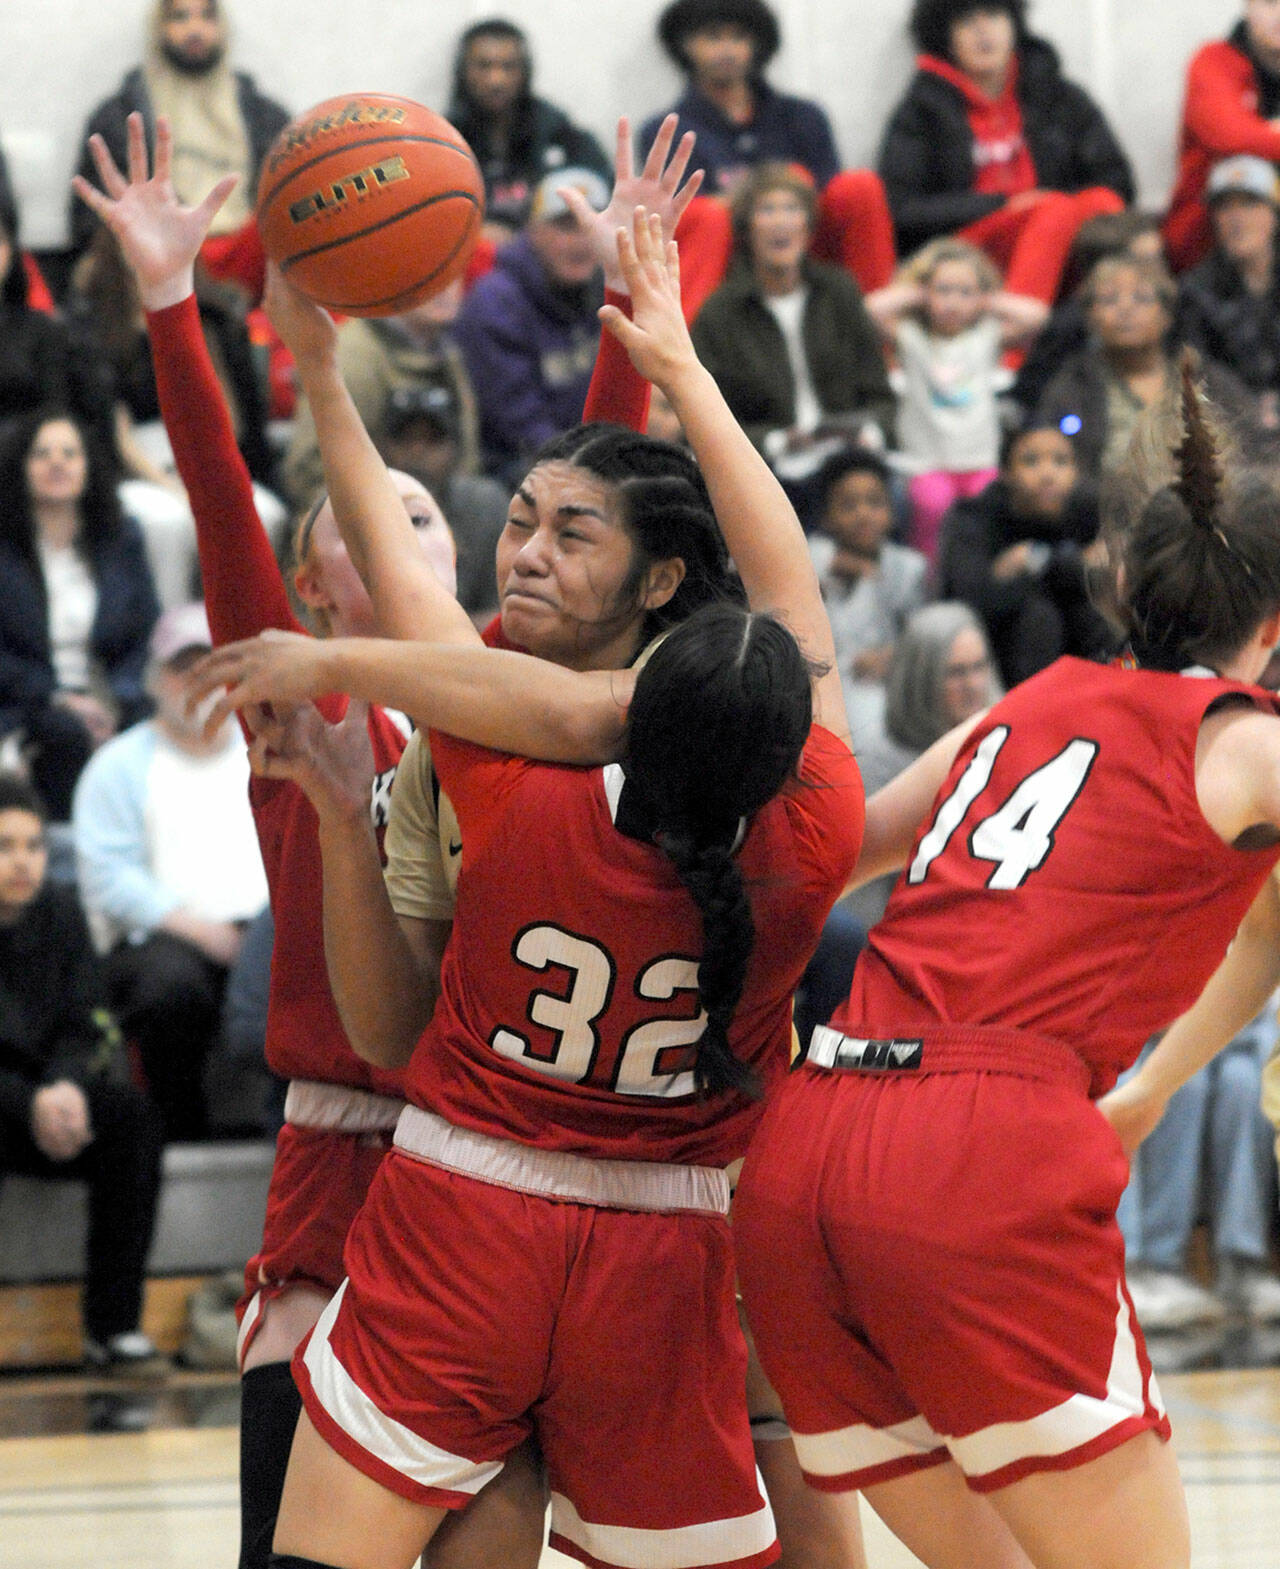 Peninsula’s Ituau Tuisaula, center, bulls her way through the Skagit Valley defenders, from left, Kailyn Allison, Sarah Cook and Janae Rhoads on Wednesday night in Port Angeles. (Keith Thorpe/Peninsula Daily News)